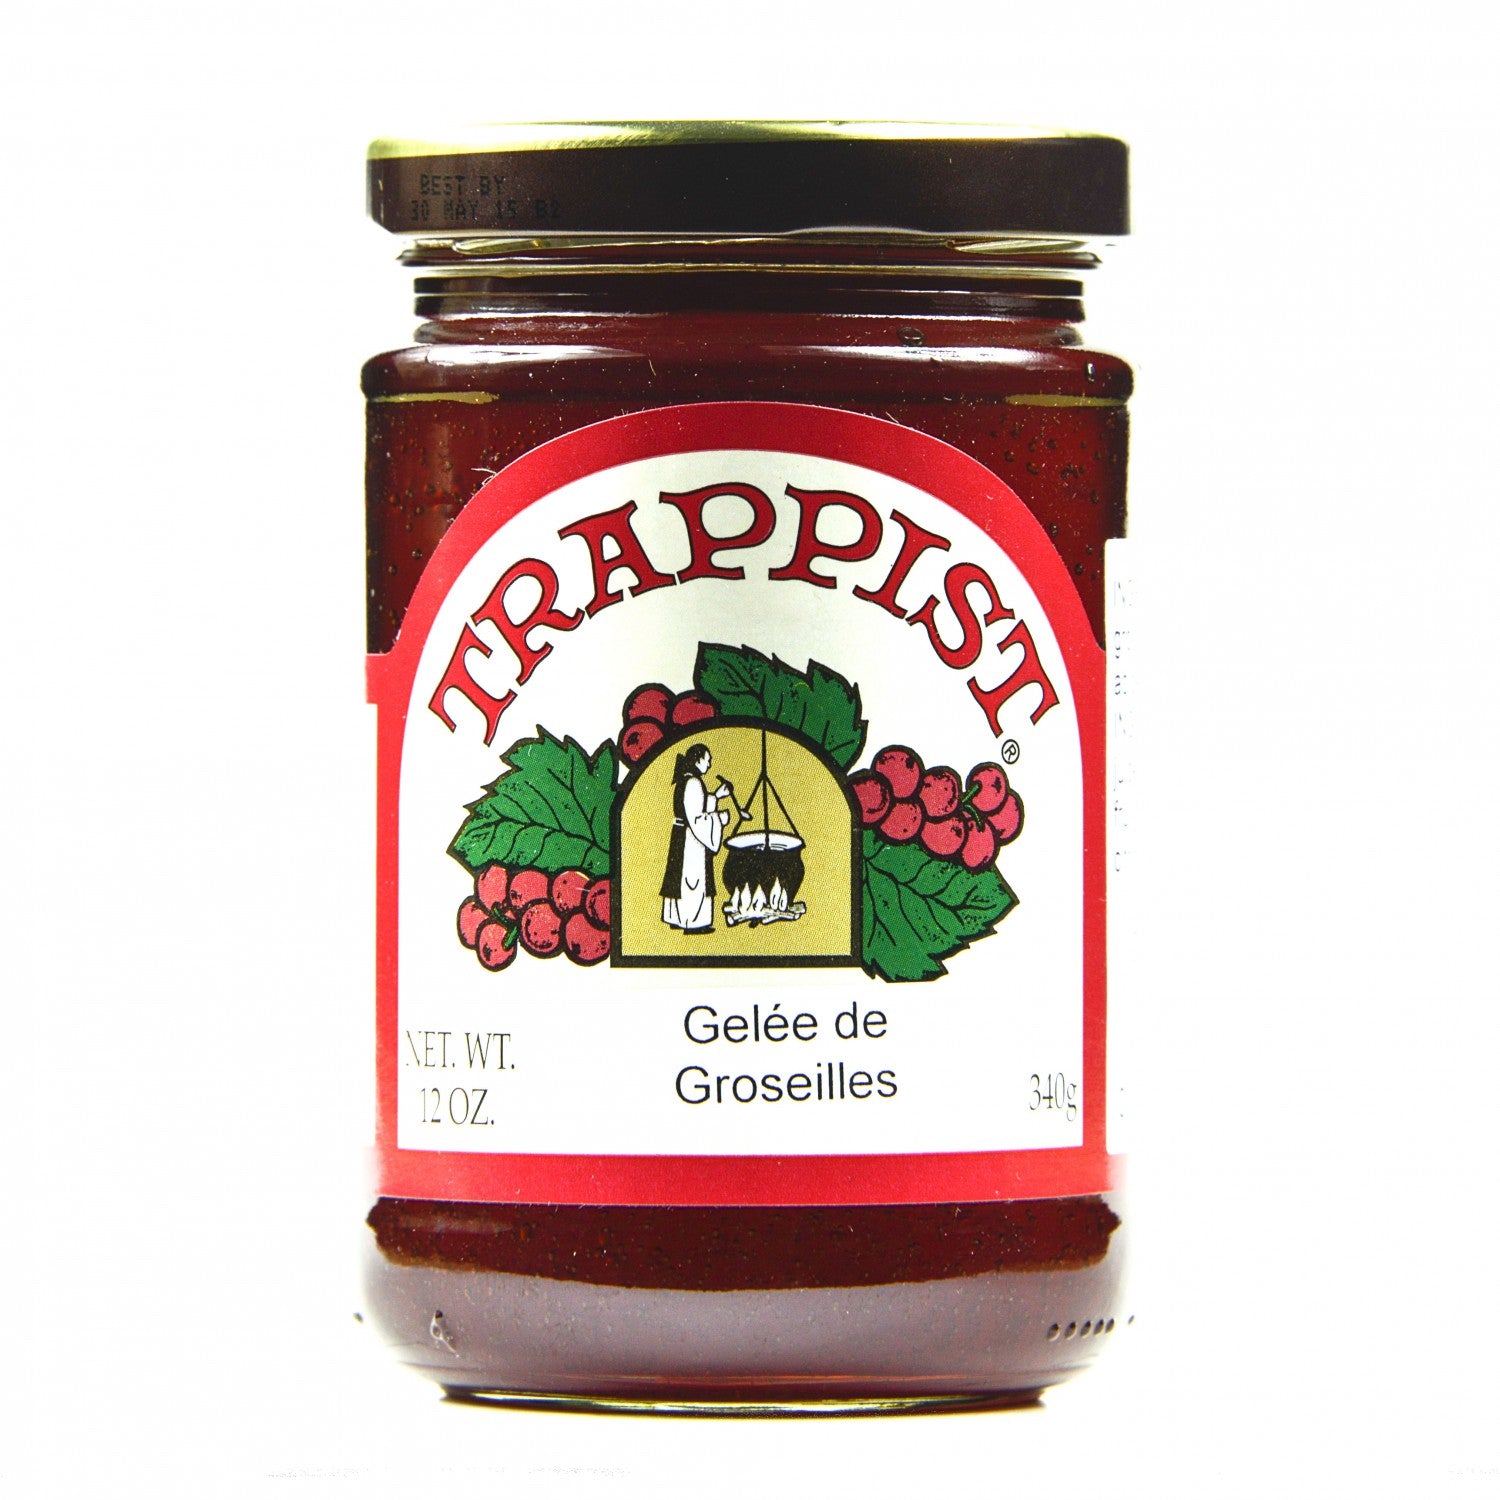 Red Currant Jelly by Trappist 